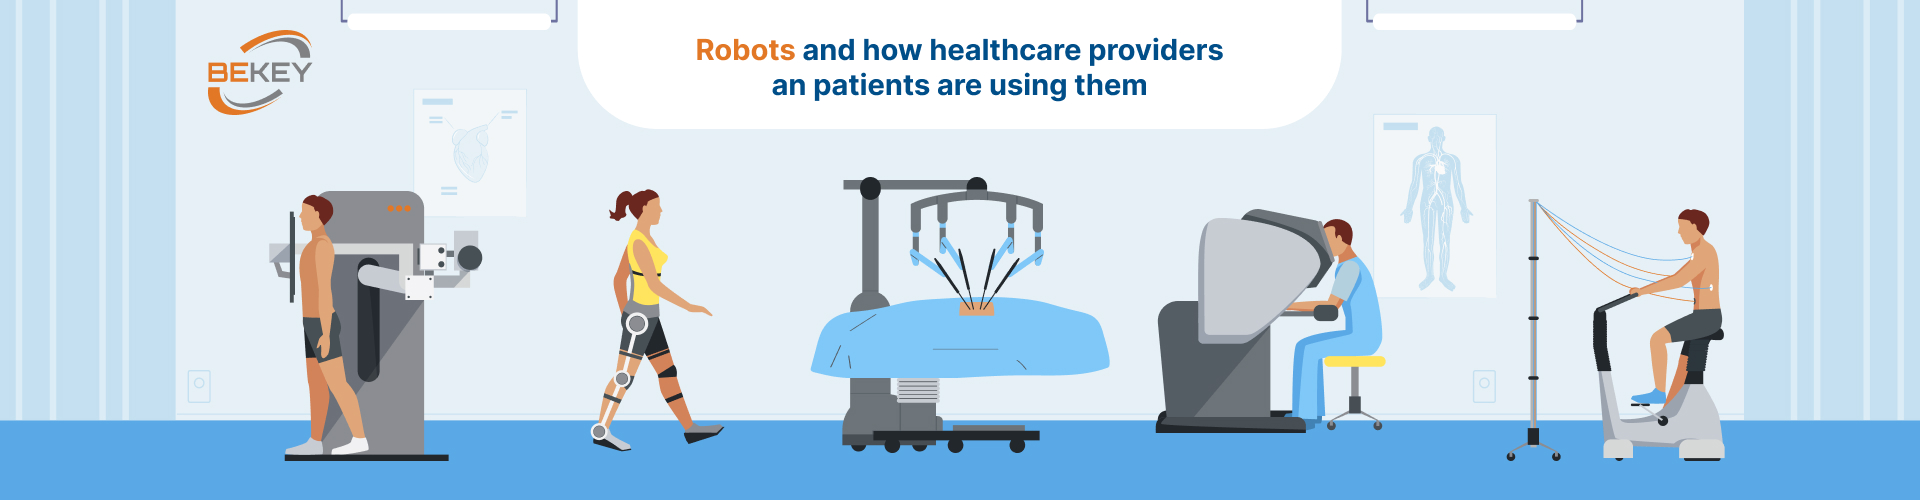 How healthcare providers and patients are using robots